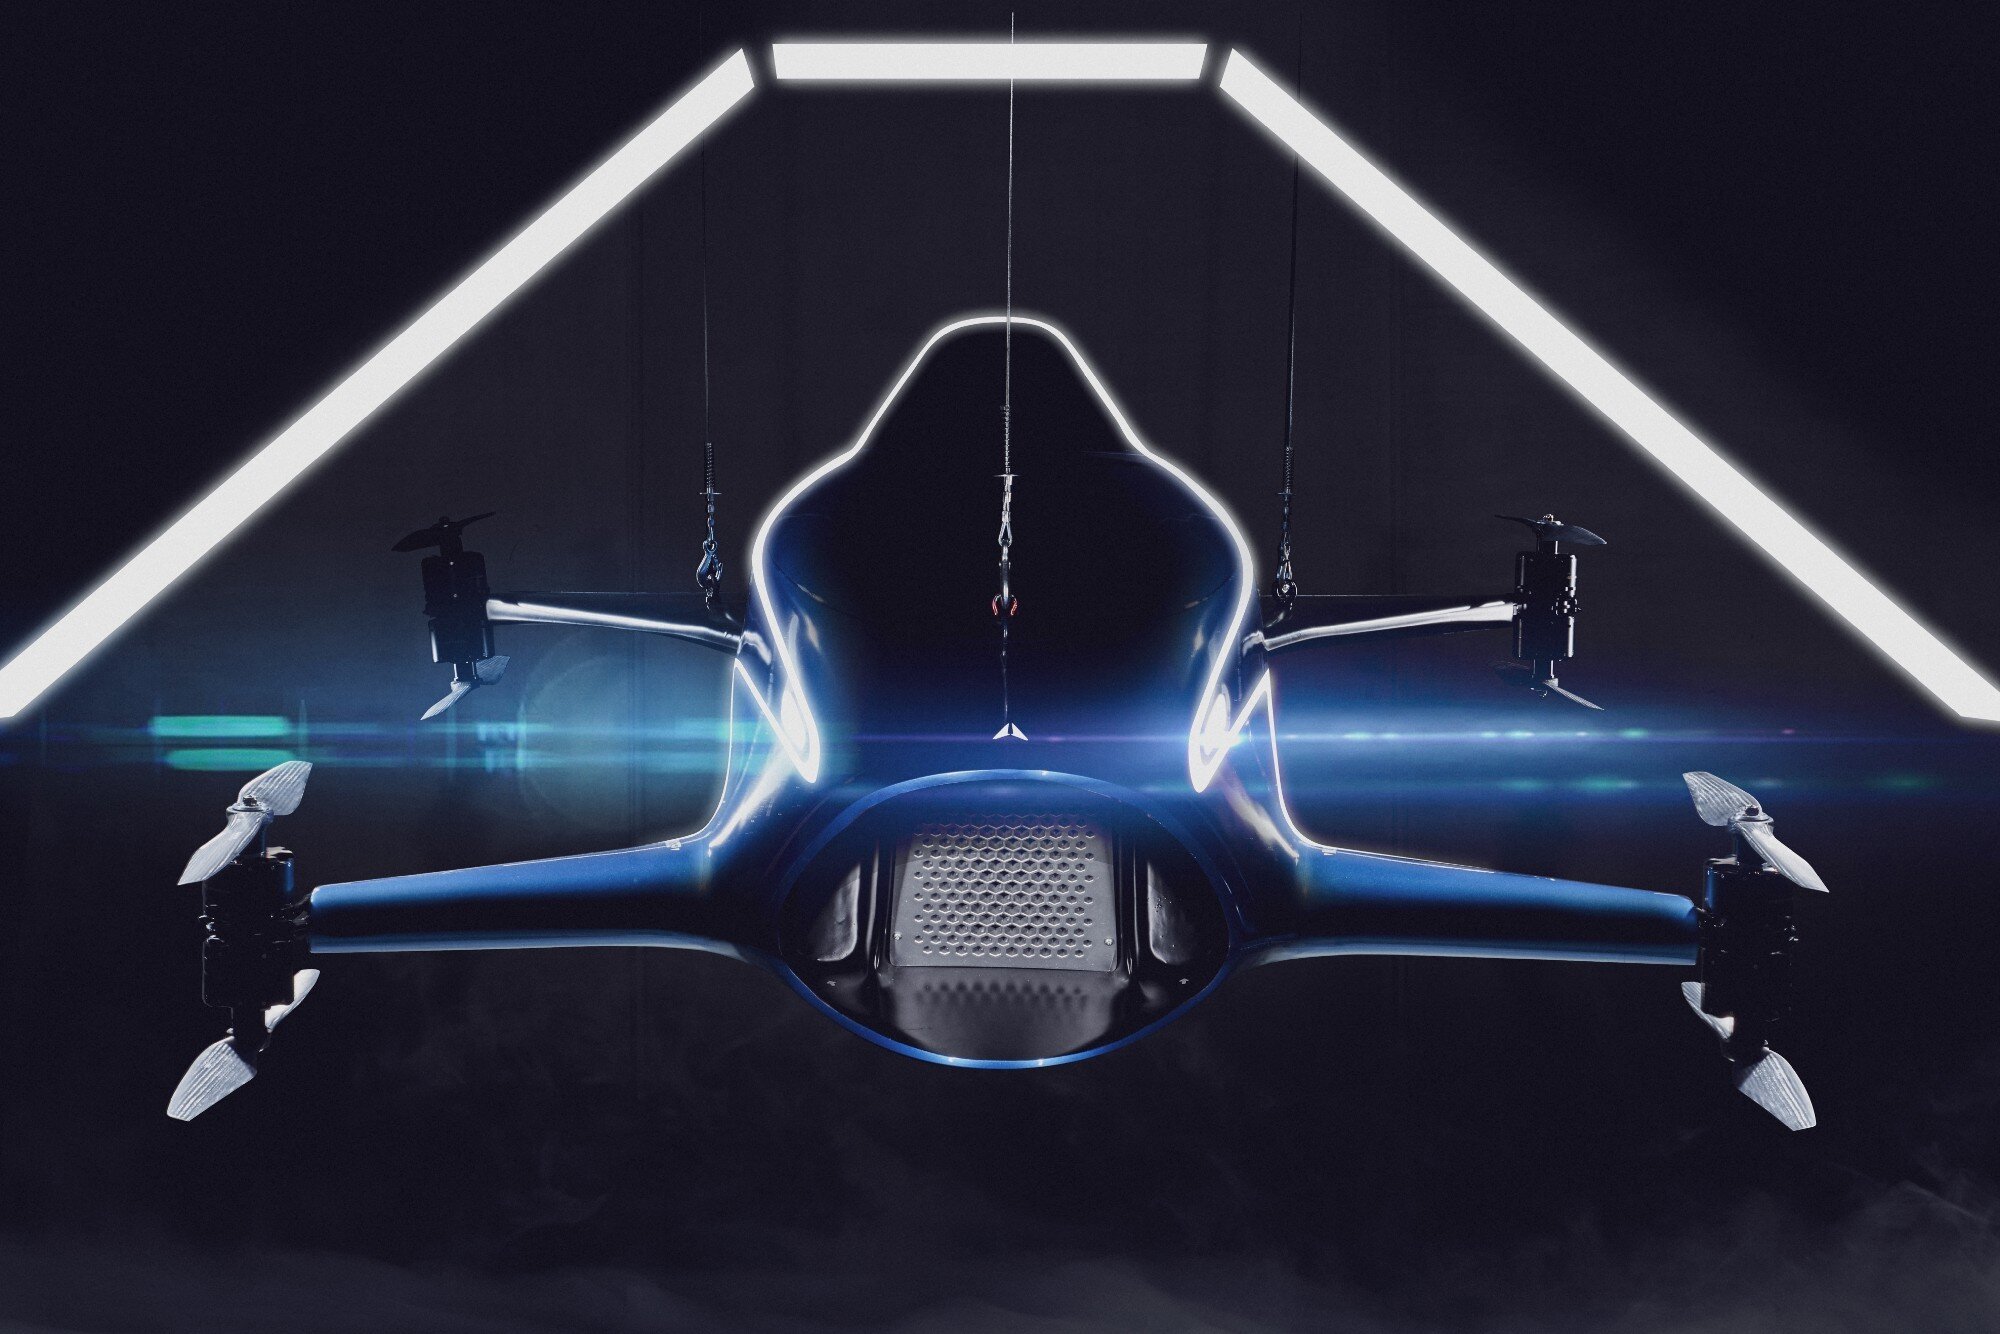 Airspeeder is the world's first flying car series